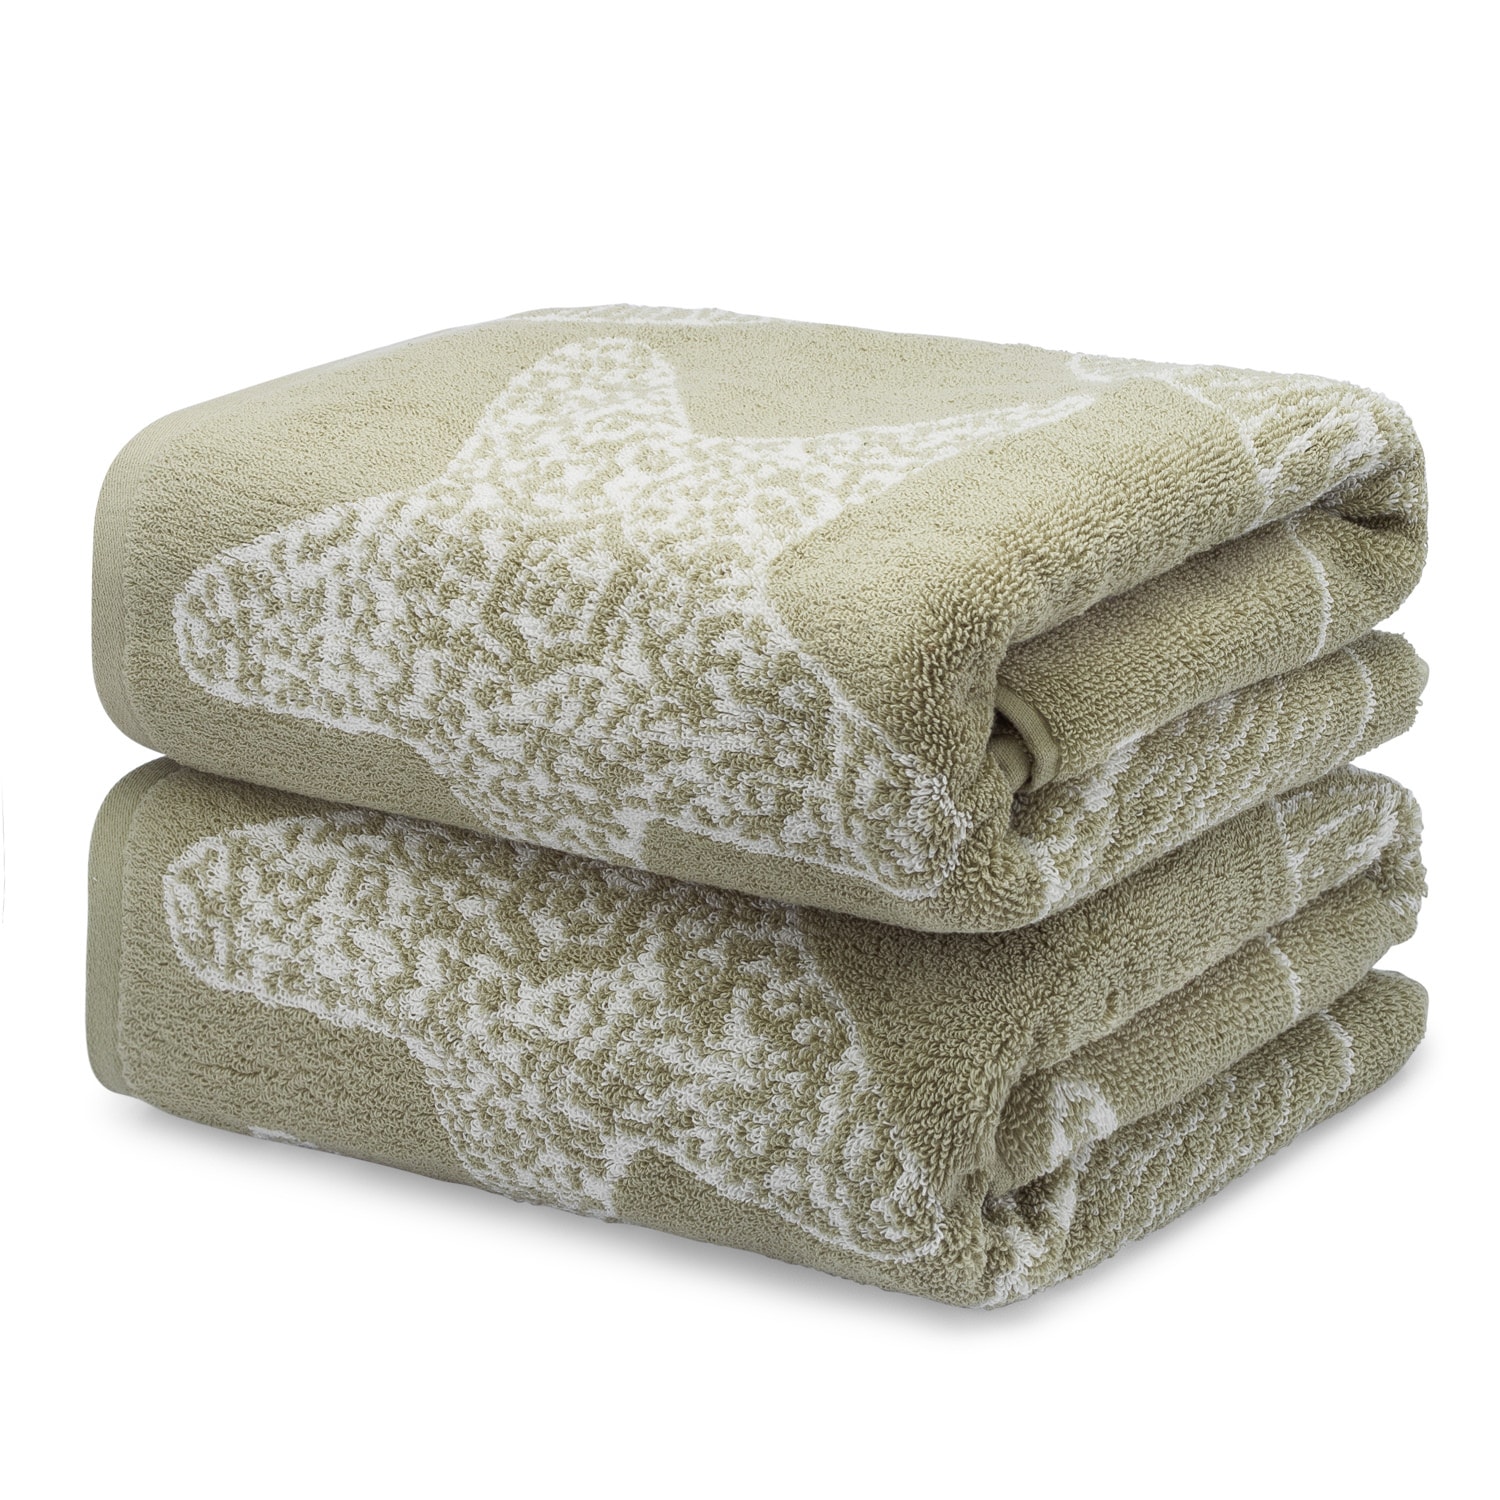 Softgoods Blankets Towels 01 Soft-goods, Towels & Blankets Featured Image